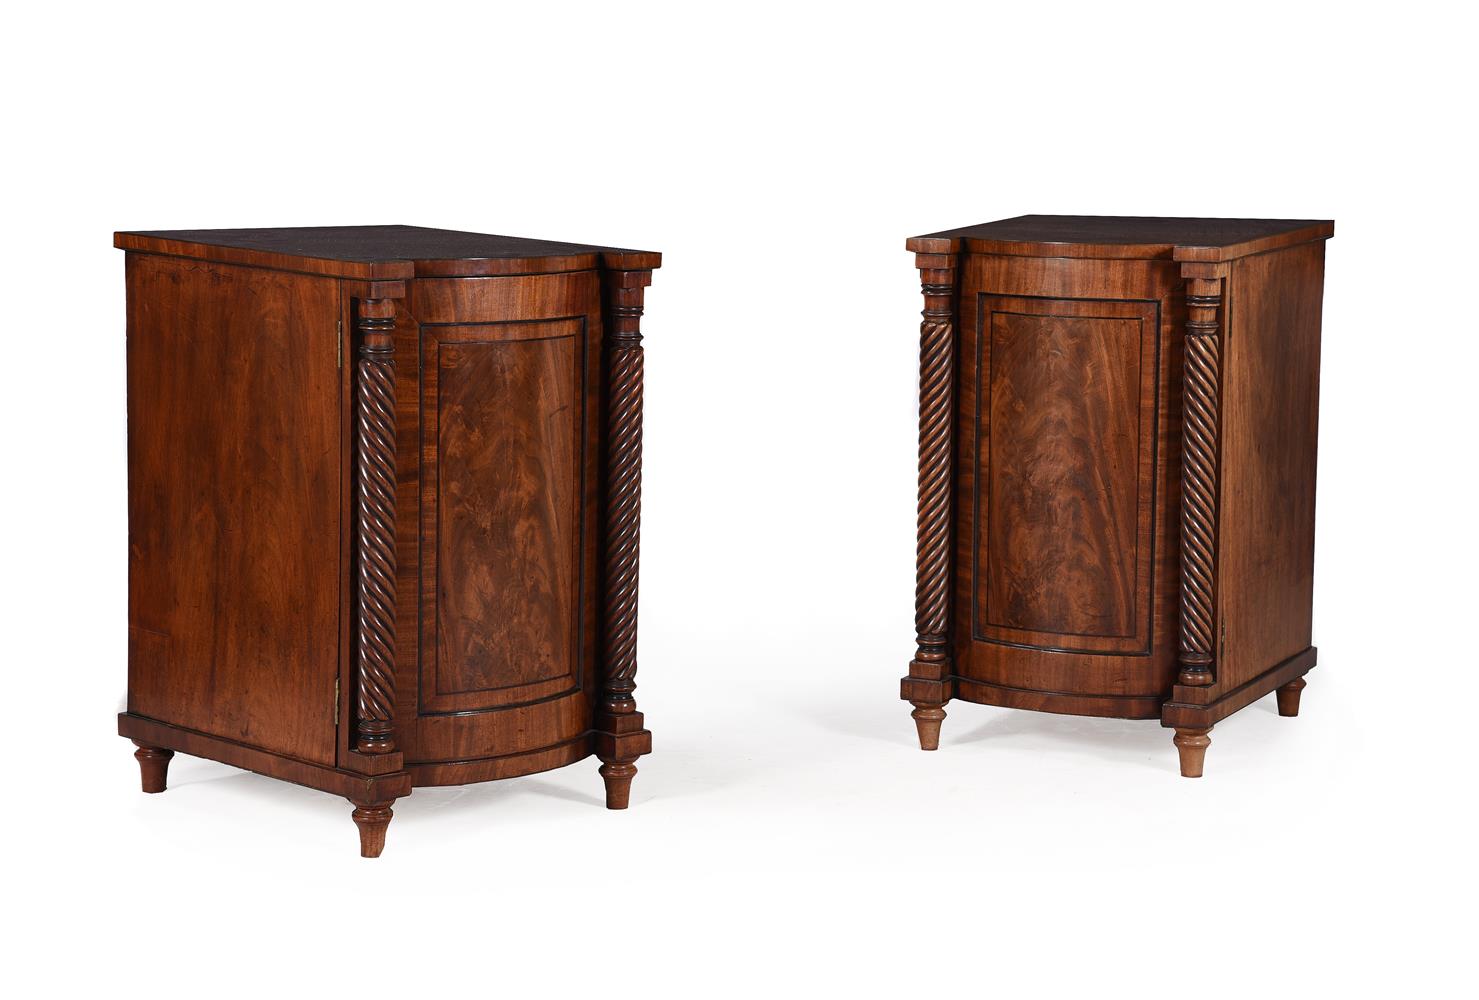 A PAIR OF WILLIAM IV MAHOGANY AND EBONISED SIDE CUPBOARDS, IN THE MANNER OF GILLOWS, CIRCA 1835